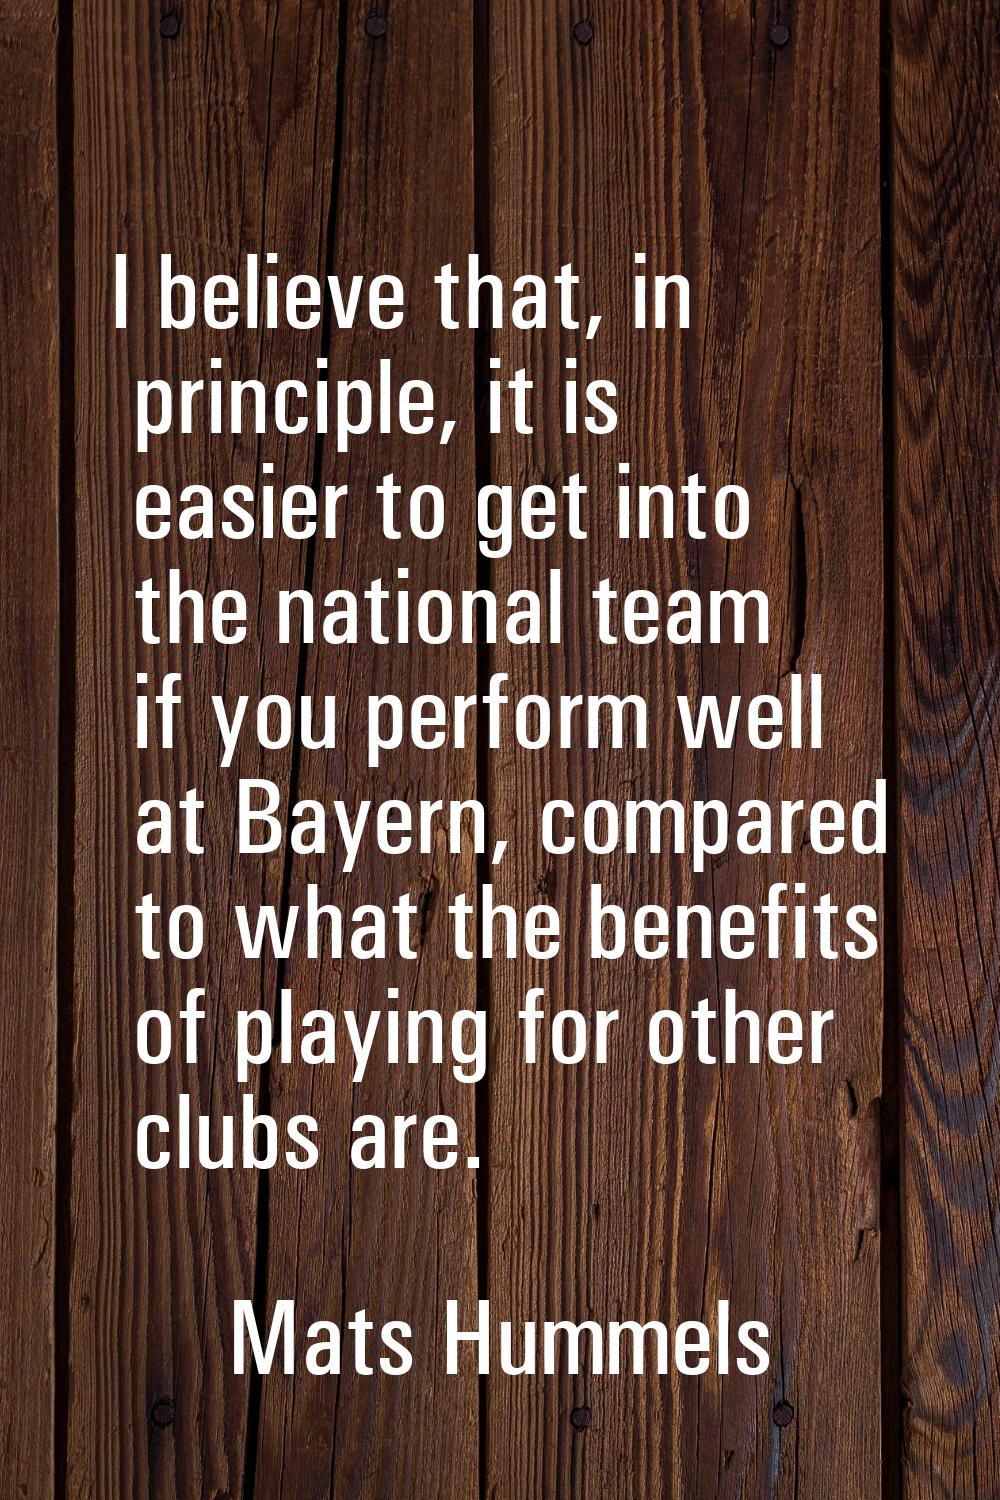 I believe that, in principle, it is easier to get into the national team if you perform well at Bay